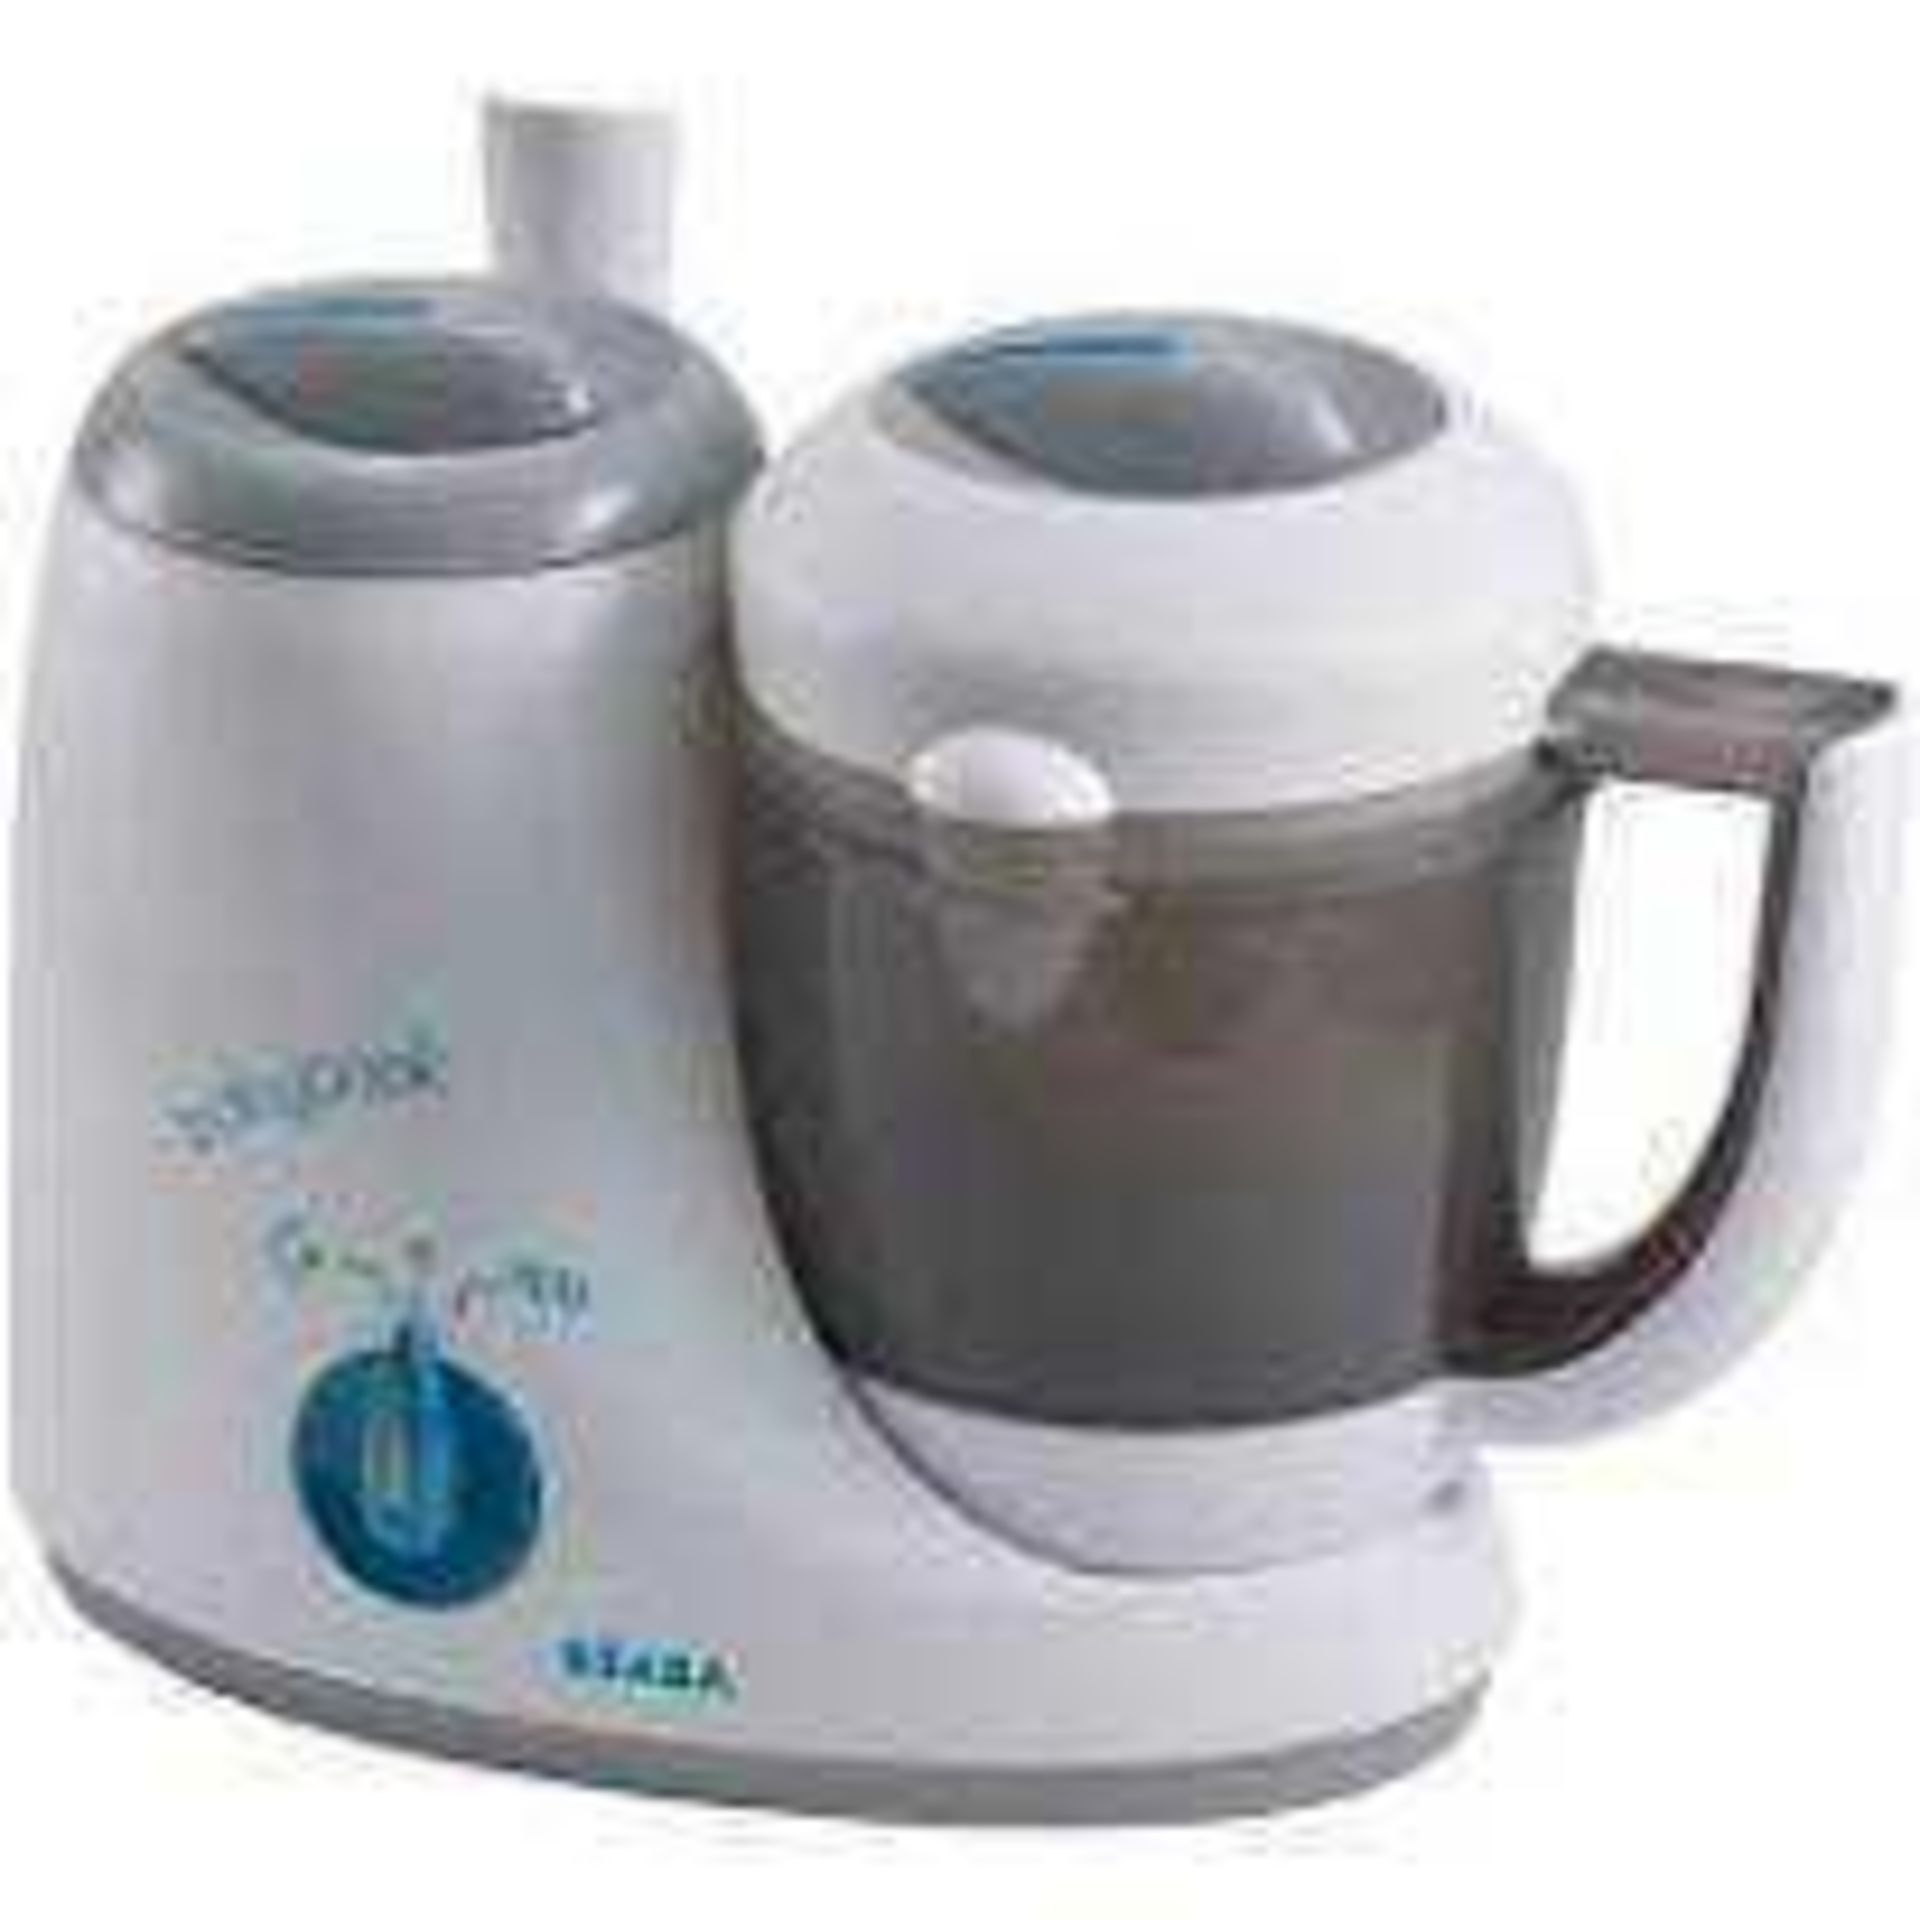 RRP £100 Boxed Beaba Babycook Original Baby Food Maker/Steam Cooker And Blender In One